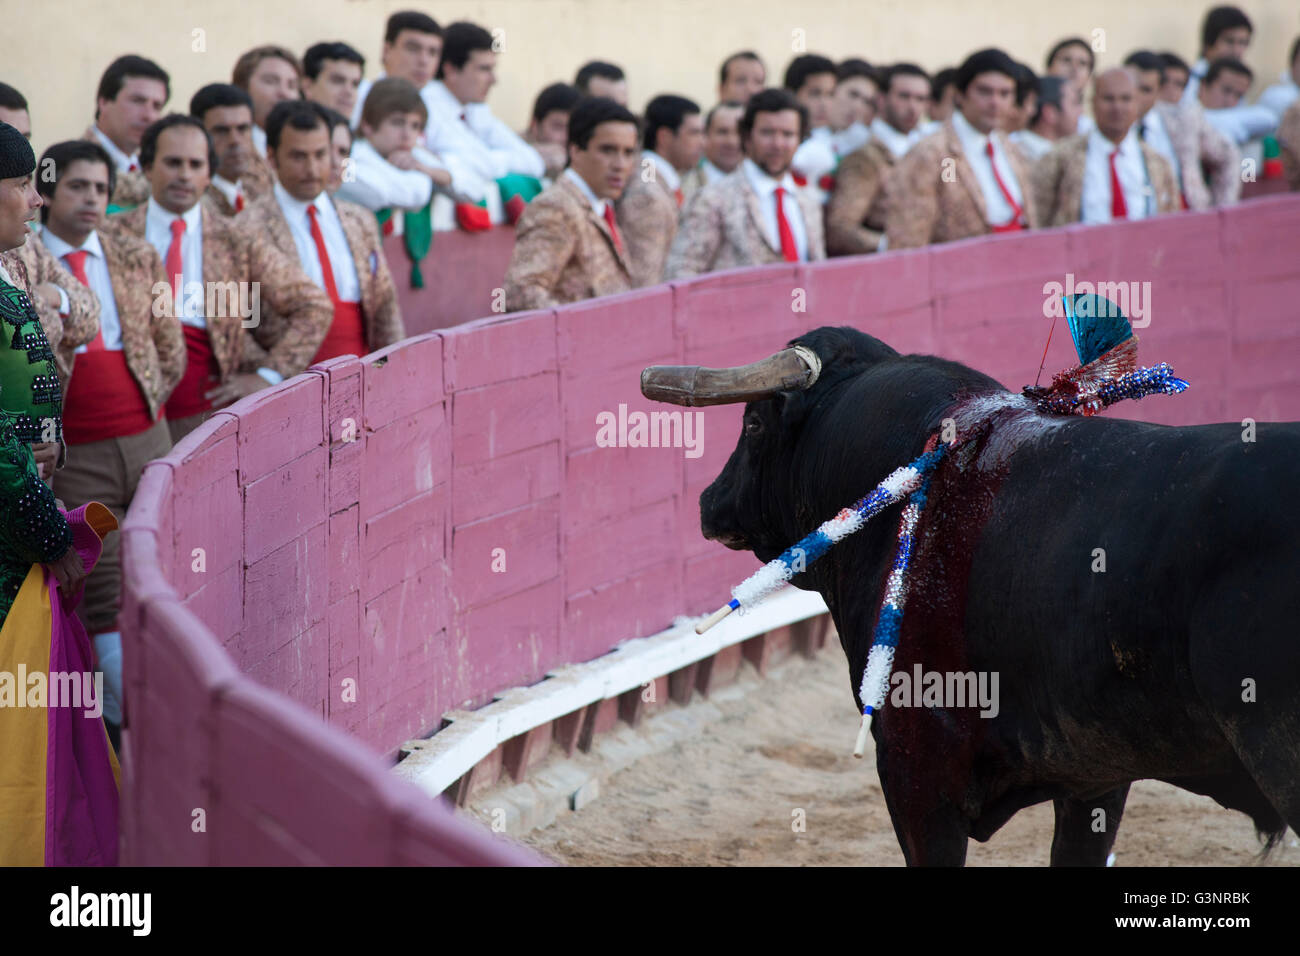 Group of men called forcados dressed in red cumberbunds and neckties and jackets watch a bull approach from inside the ring, Santarem, Portugal Stock Photo